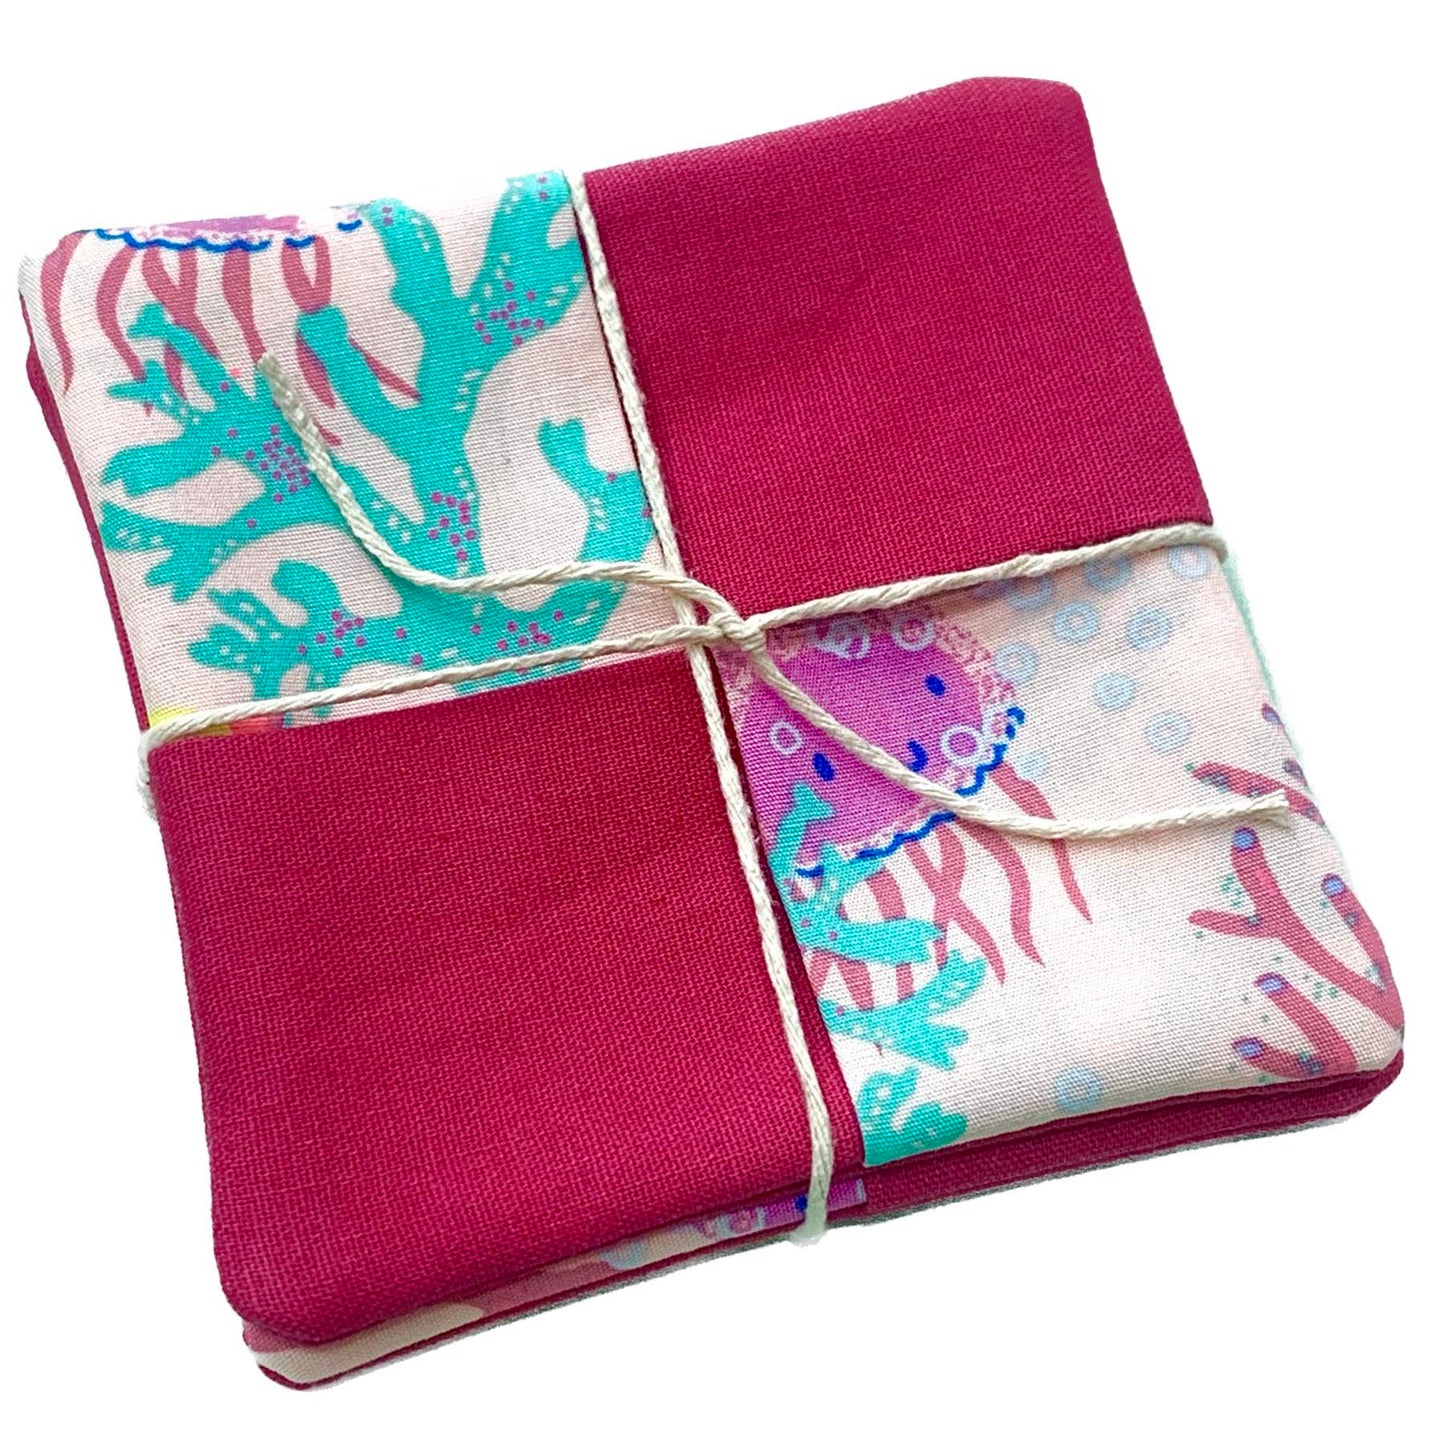 MAKIN' WHOOPEE- 2 PACK WINE GLASS COASTERS- Under the Sea & Pink